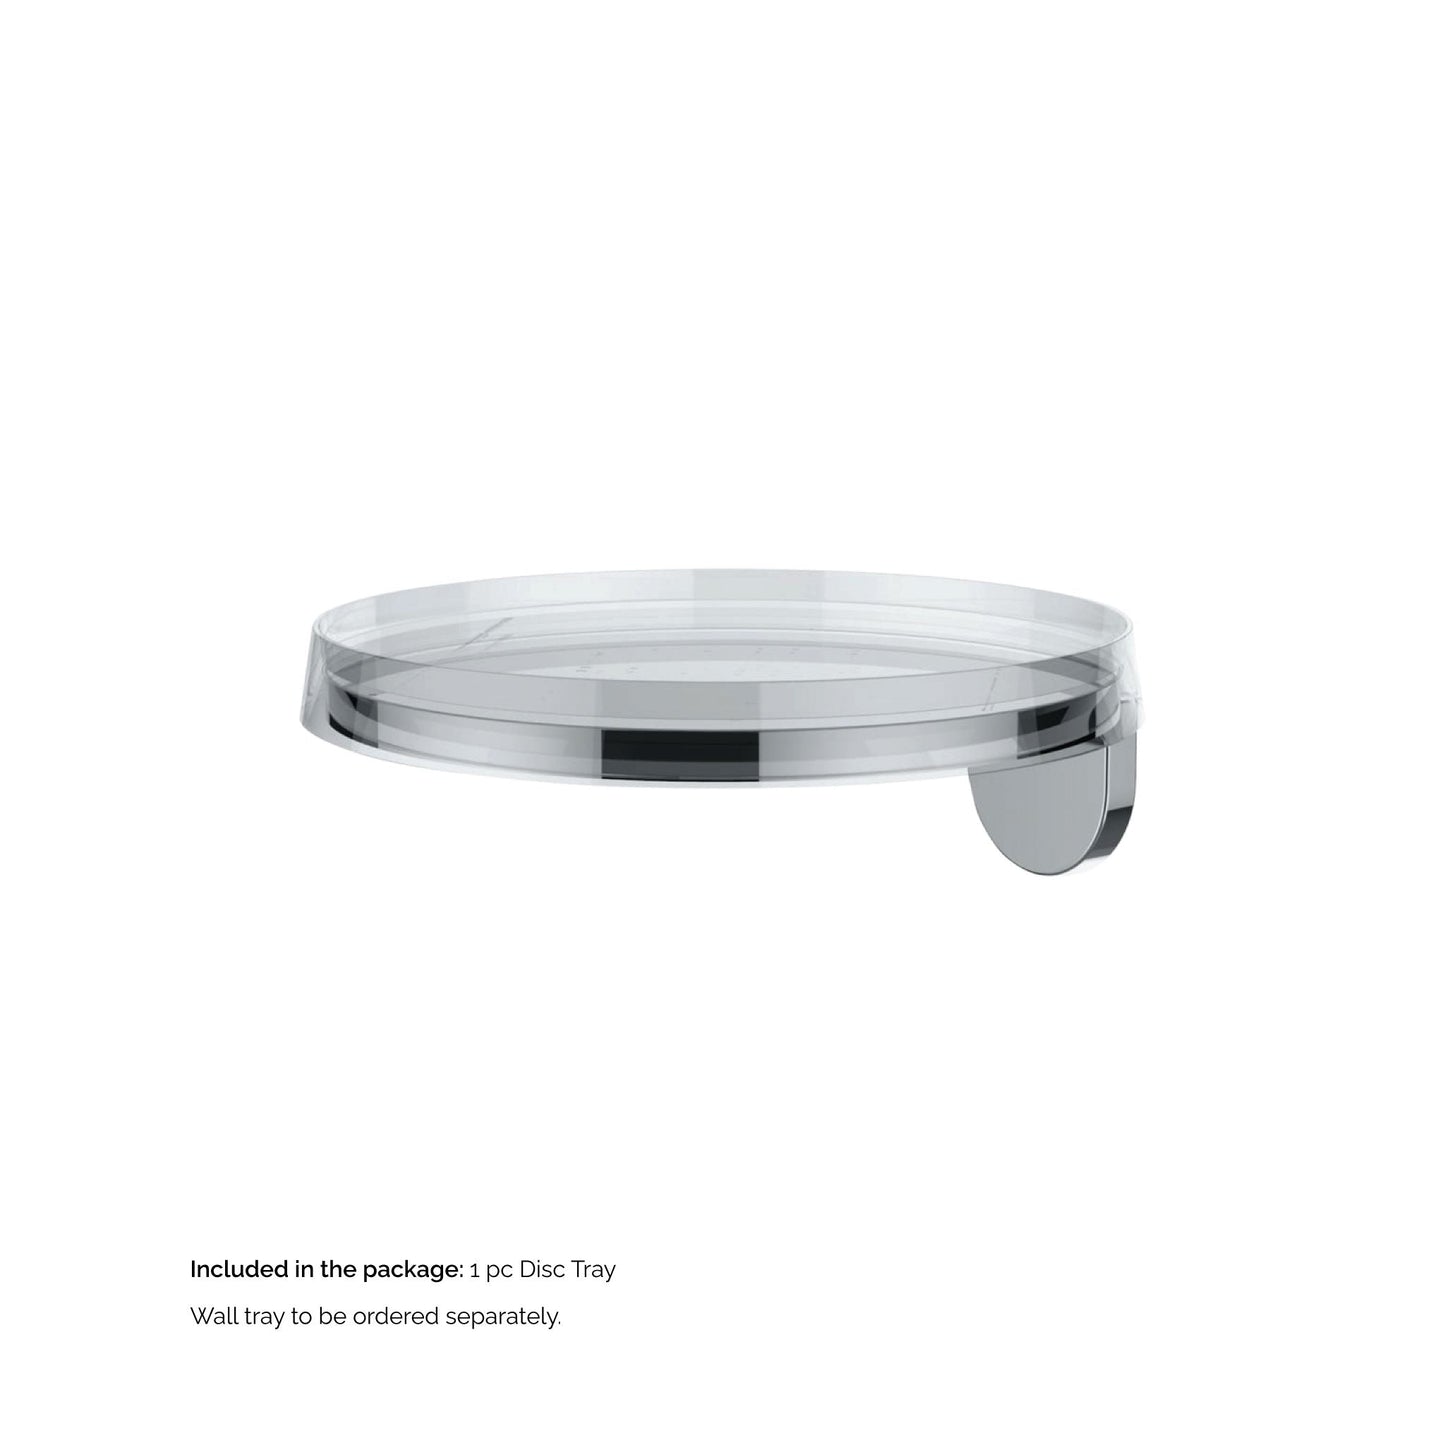 Laufen Kartell 7" Crystal Disc Tray for Toilet Paper Holders, Faucets, and Wall-Mounted Trays